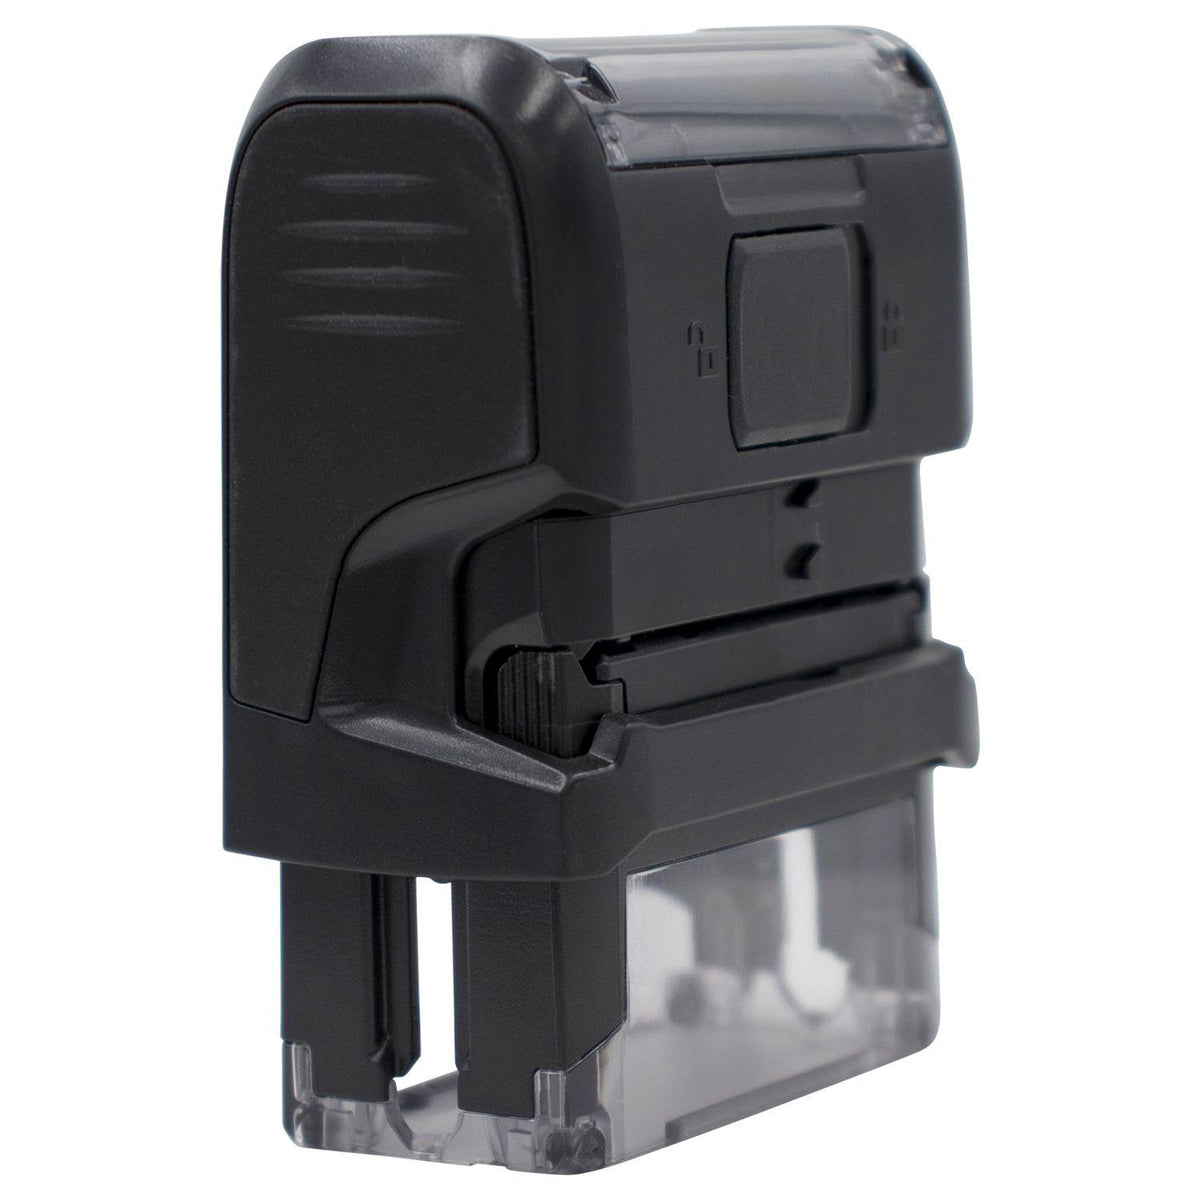 Self-Inking Tripilicado Stamp - Engineer Seal Stamps - Brand_Trodat, Impression Size_Small, Stamp Type_Self-Inking Stamp, Type of Use_General, Type of Use_Office